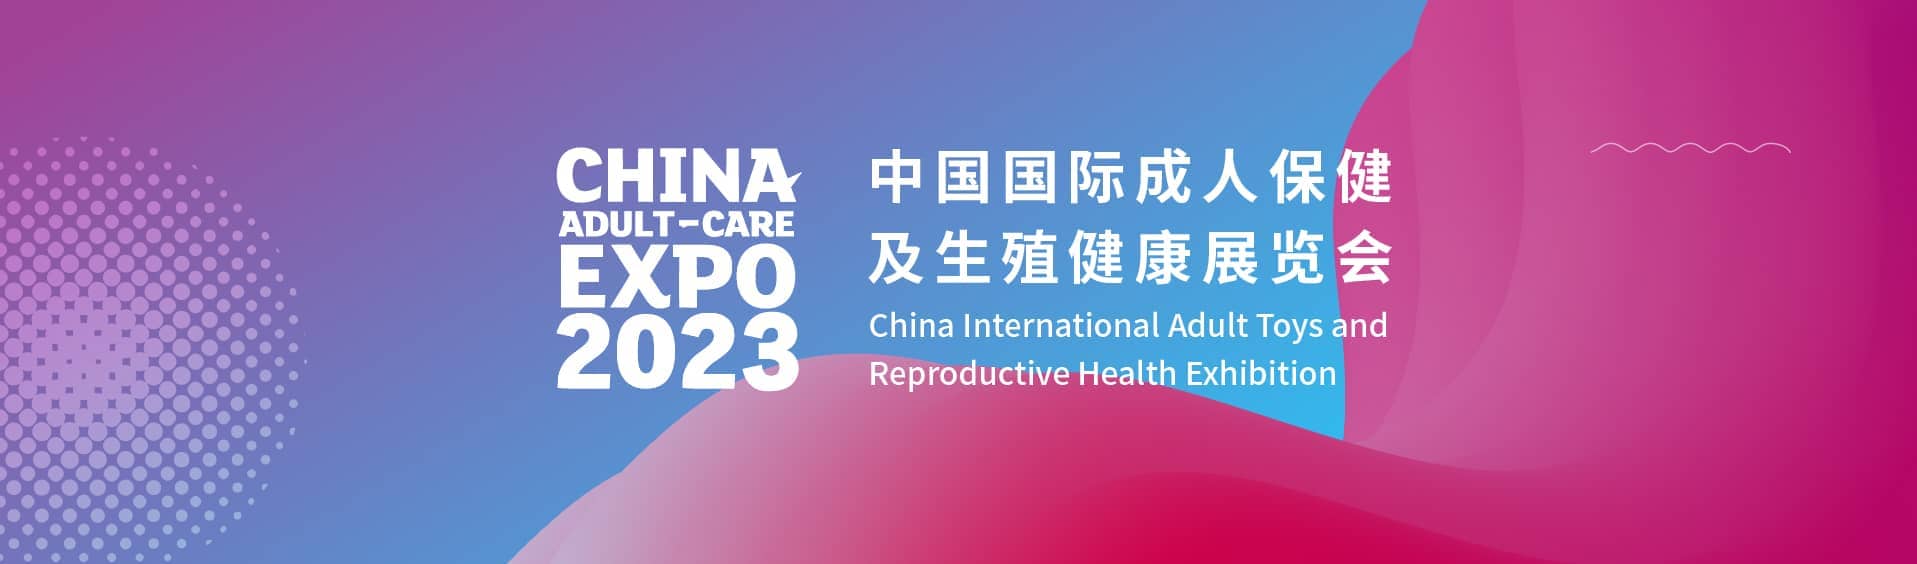 China International Adult Toys and Reproductive Health Exhibition Validation 